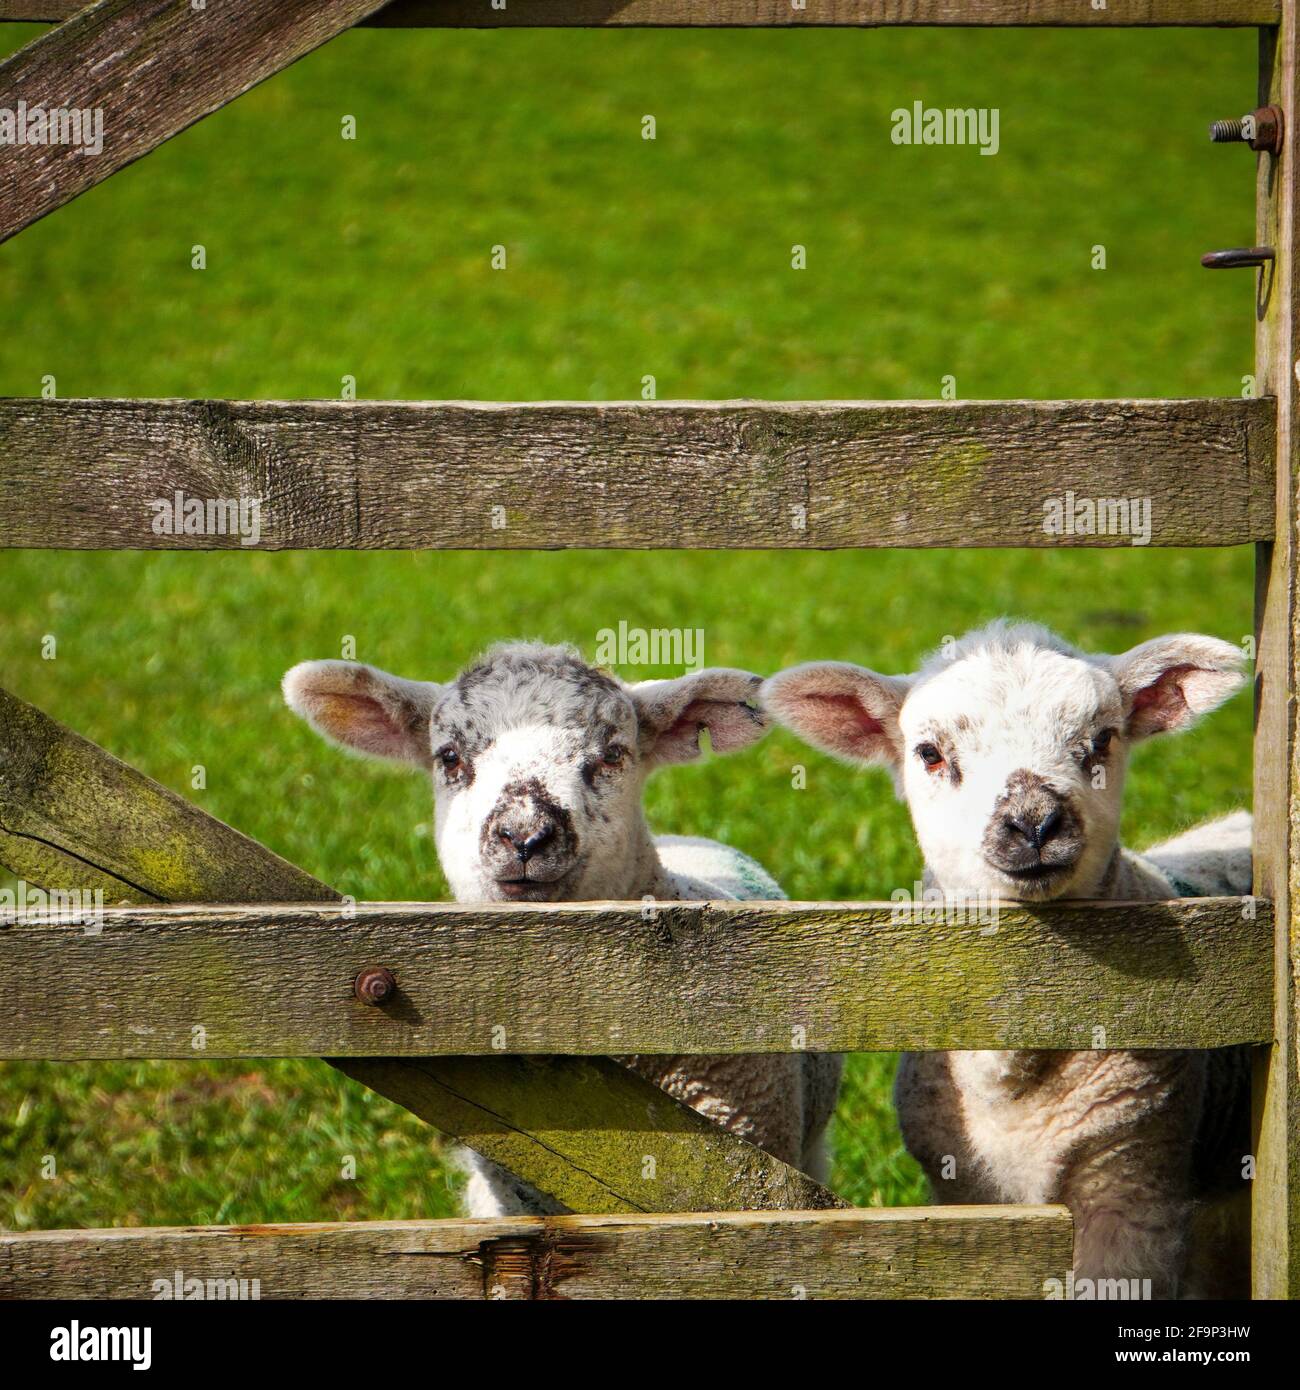 Two Lambs Looking Through Gate Stock Photo